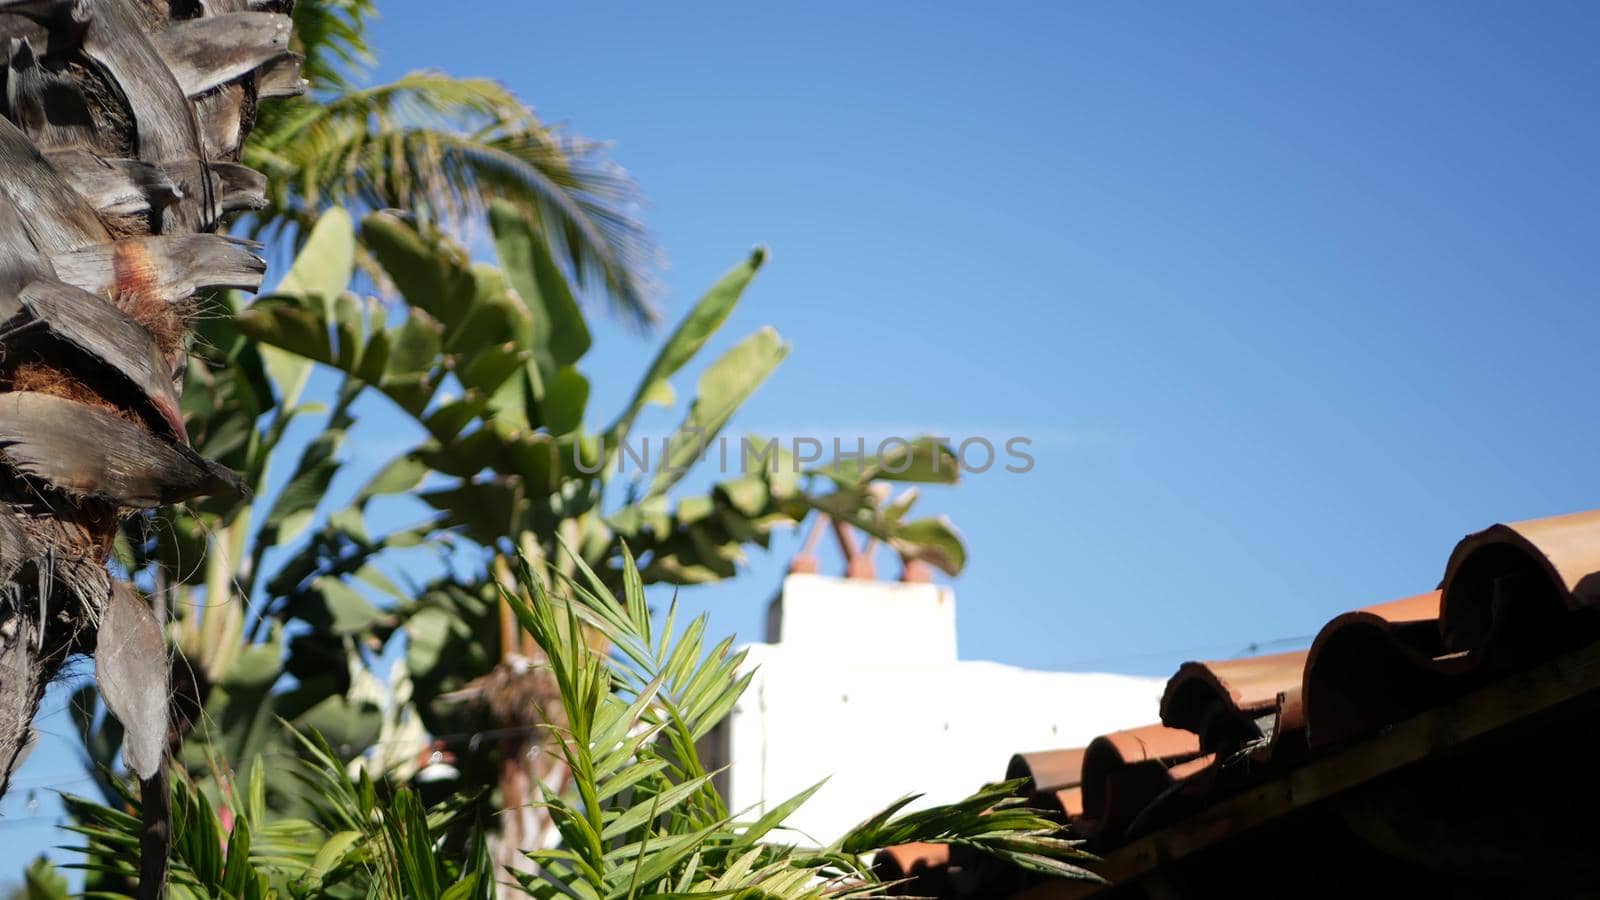 Mexican colonial style suburban, hispanic house exterior, green lush garden, San Diego, California USA. Mediterranean terracotta ceramic clay tile on roof. Rustic spanish tiled rooftop. Rural details by DogoraSun